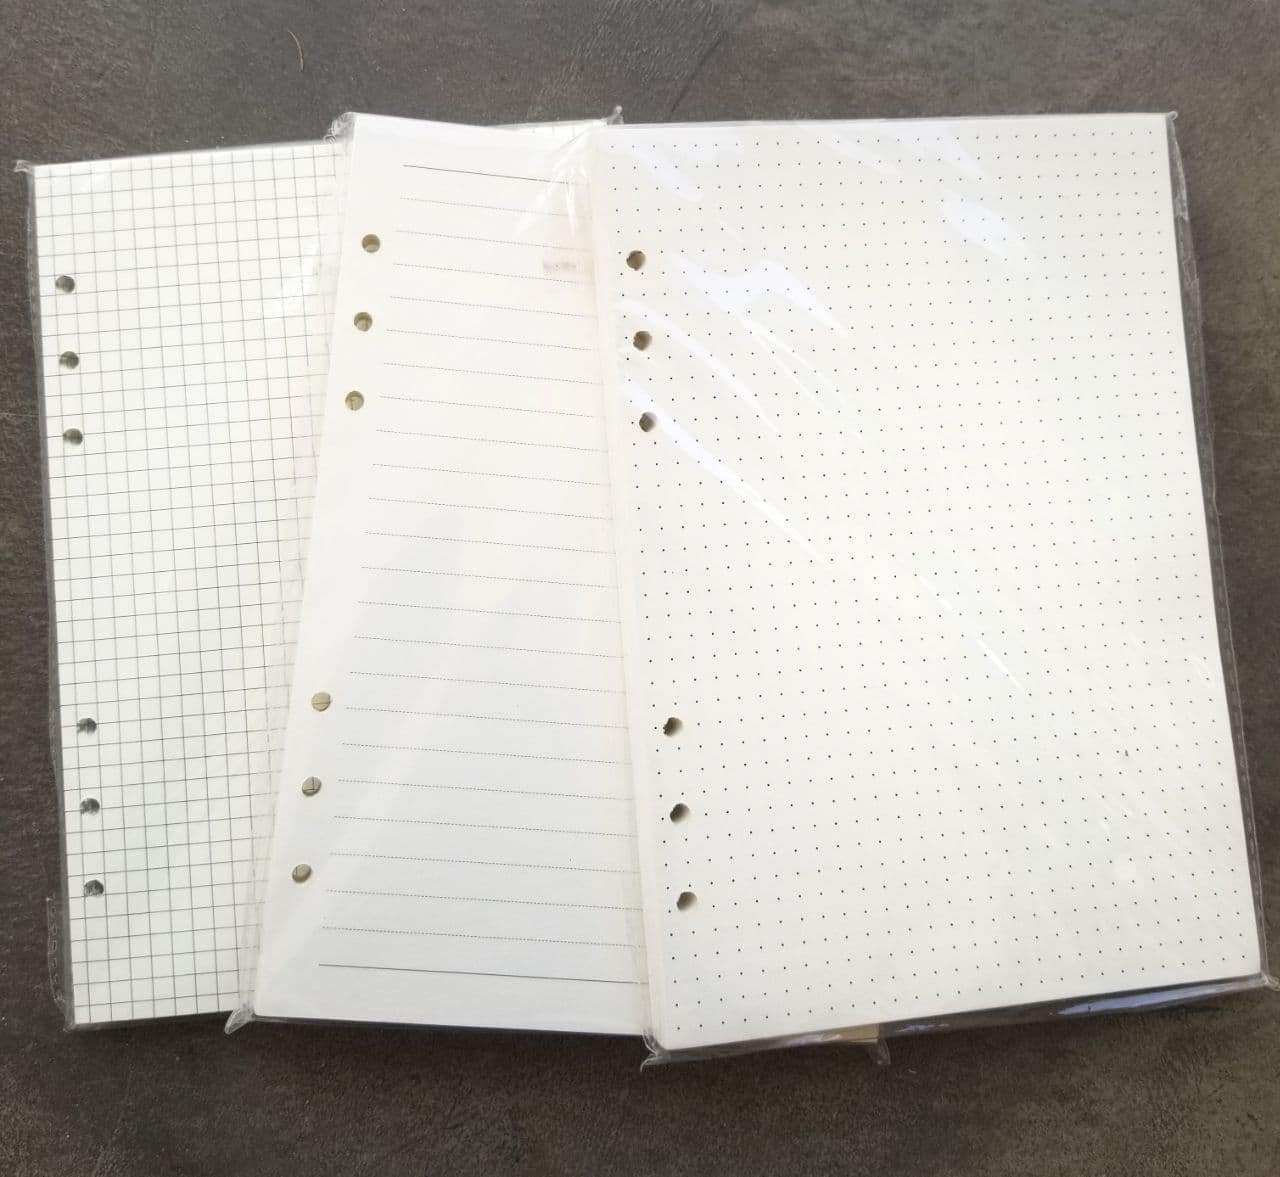 A5 Lined Paper 6-Hole Punched, 250 Sheets (500 Pages), 100 gsm, A5 Binder Refill